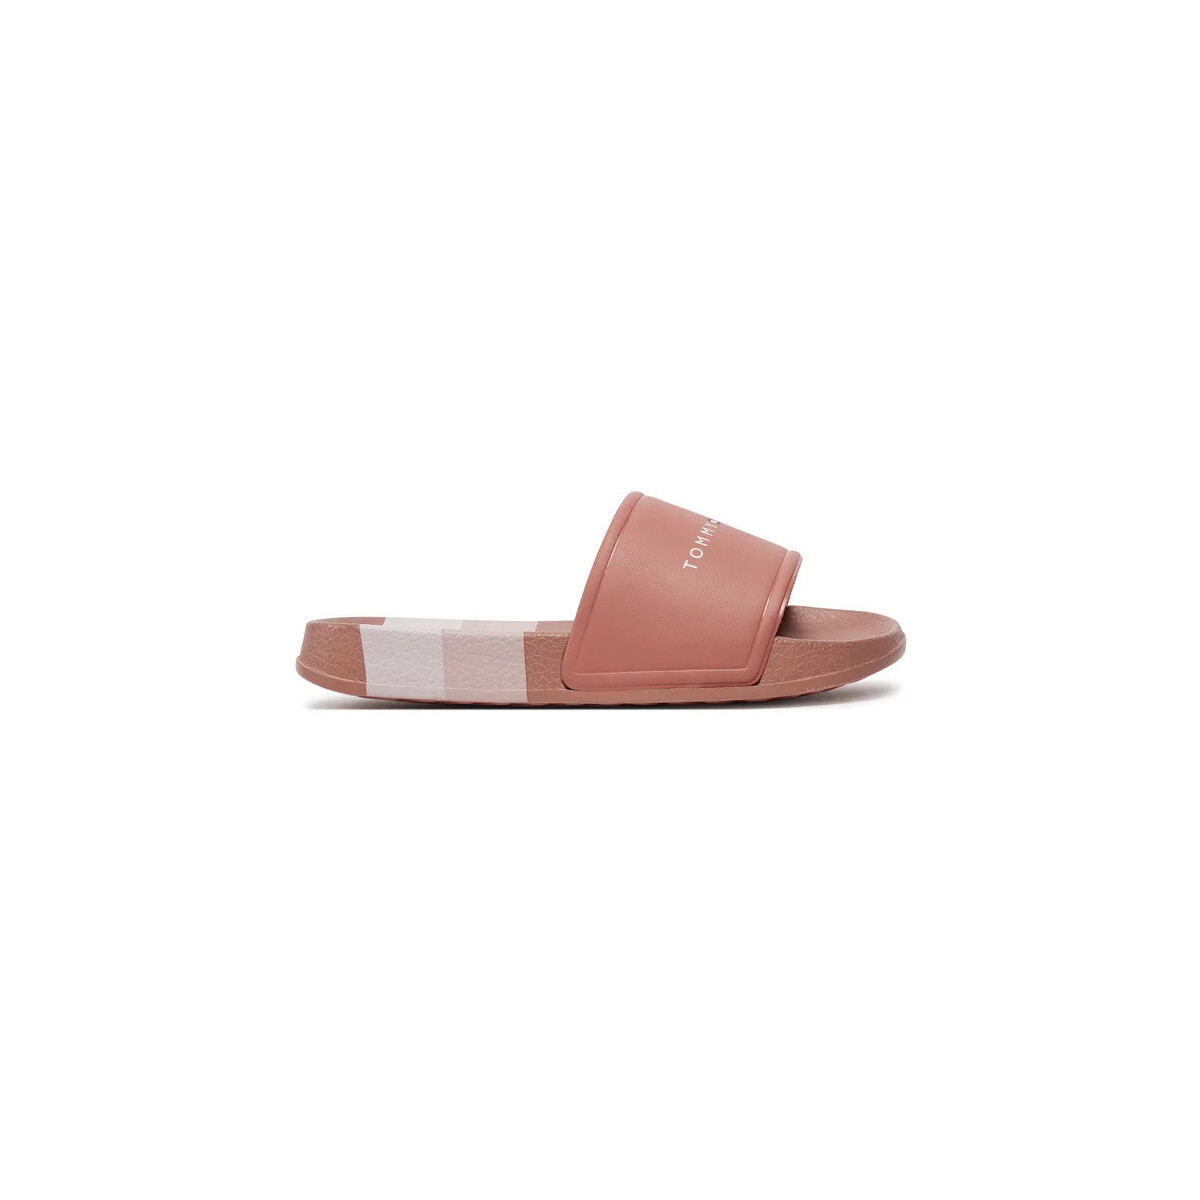 Chaussures Femme Tongs Tommy Hilfiger - Claquettes - vieux rose Rose